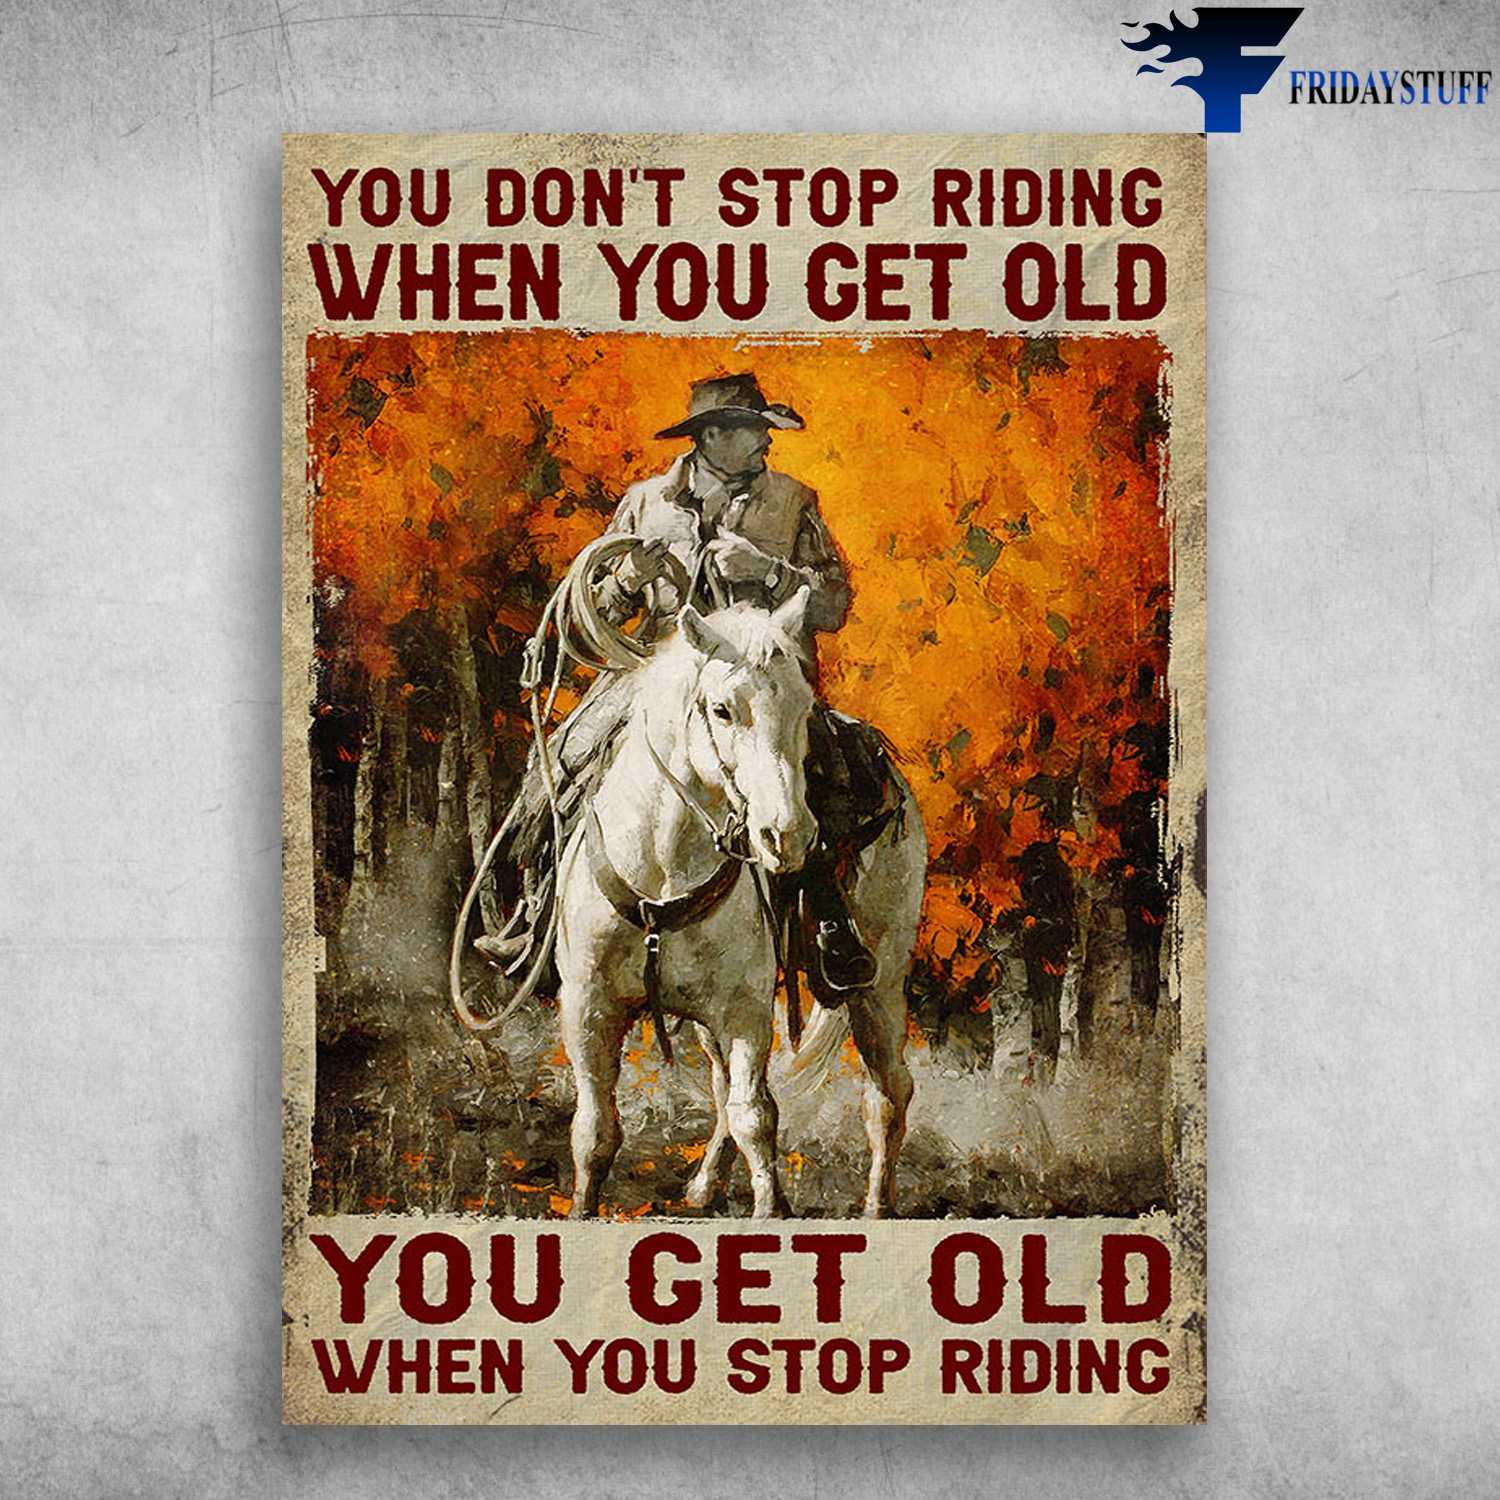 Old Cowboy, Riding Horse - You Don't Stop Riding When You Get Old, You Get Old When You Stop Riding